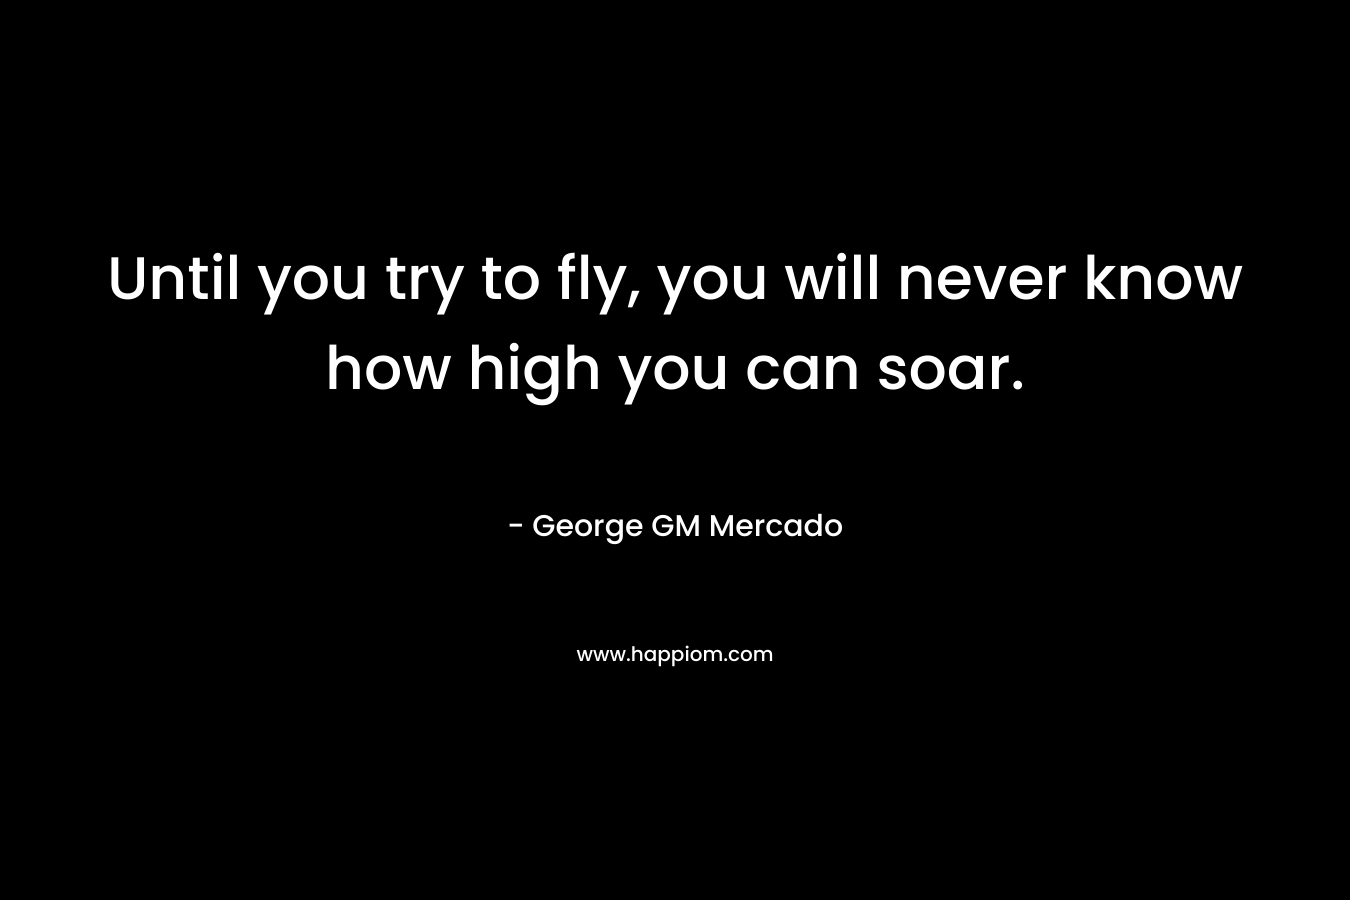 Until you try to fly, you will never know how high you can soar. – George GM Mercado